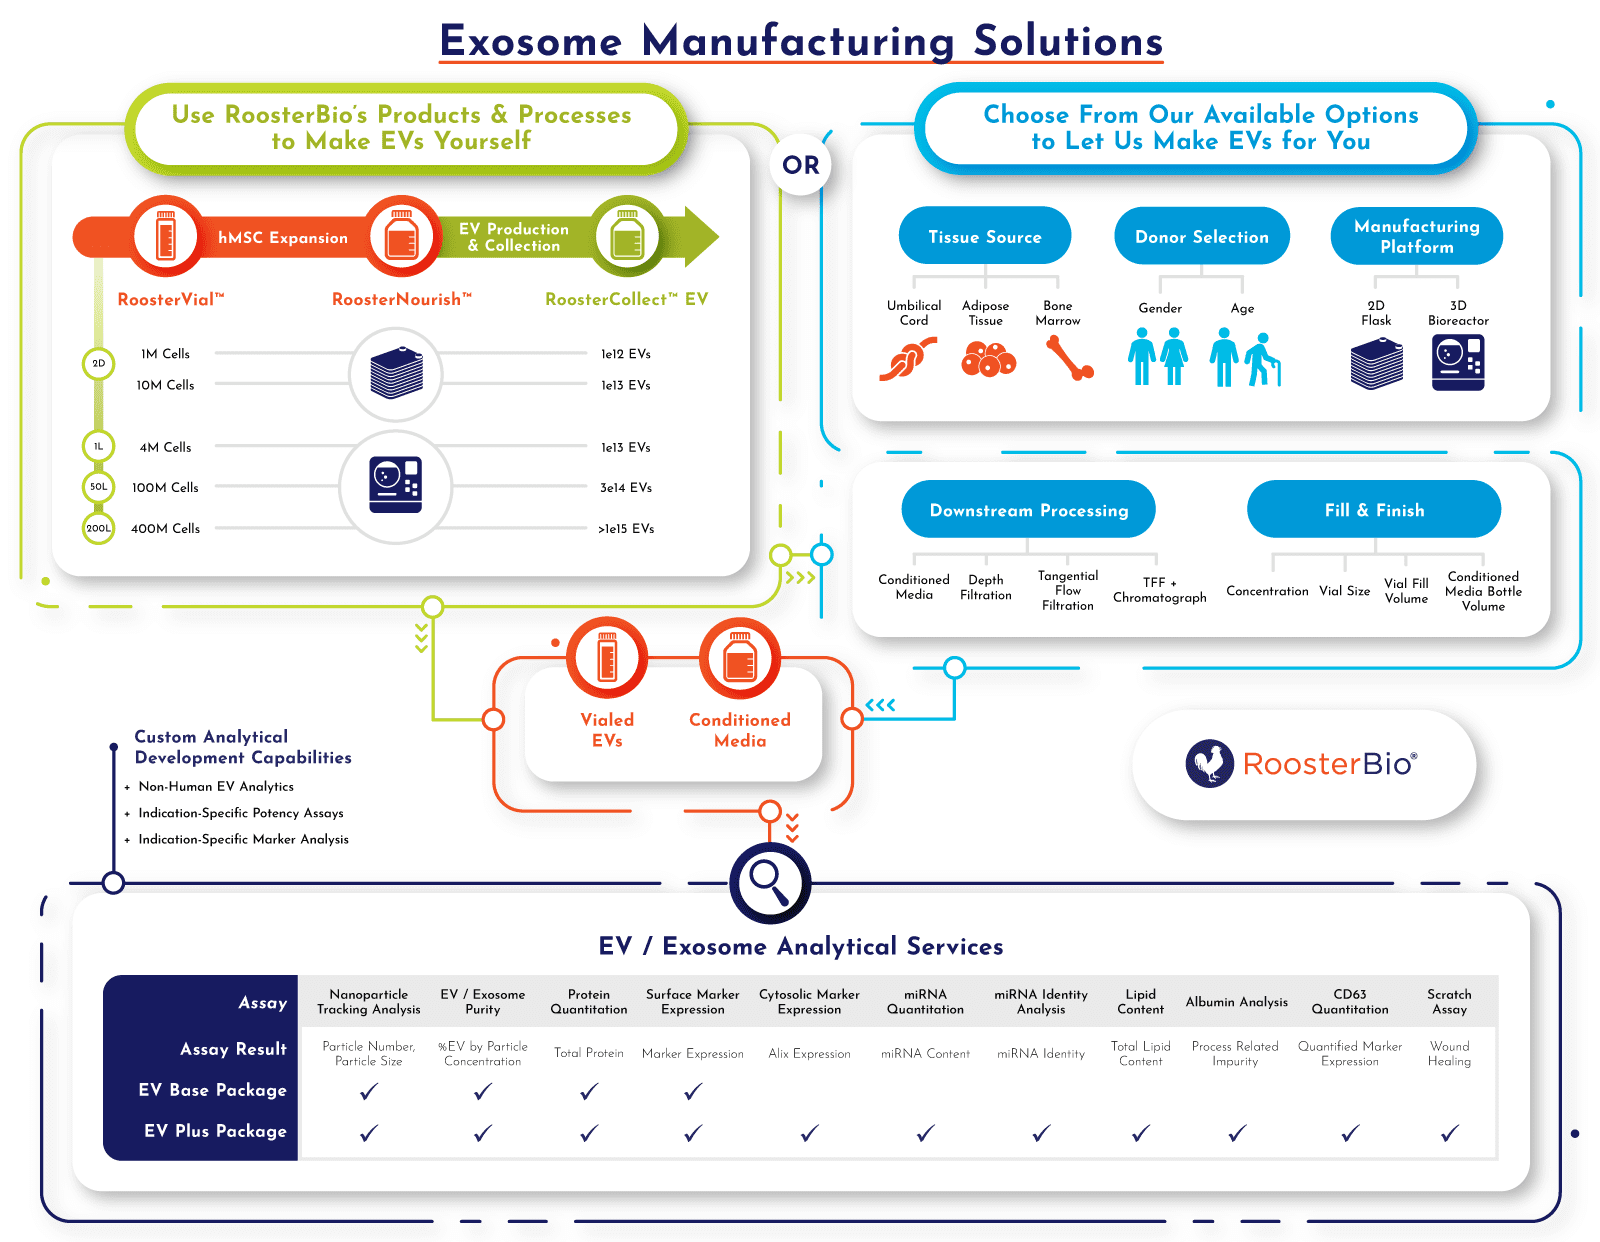 Exosome Manufacturing Solutions